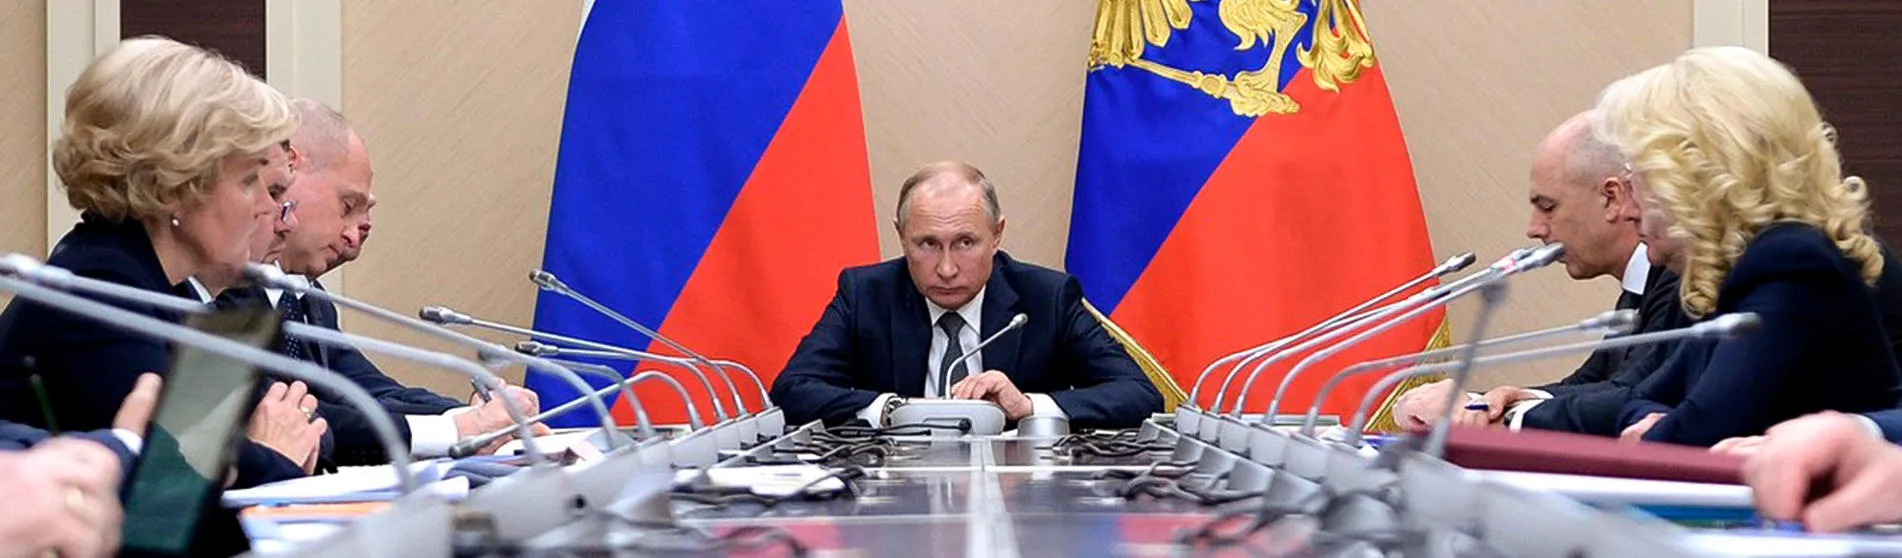 Russian president, Vladimir Putin keeps a tight grip on domestic media. Picture: STOCK IMAGE